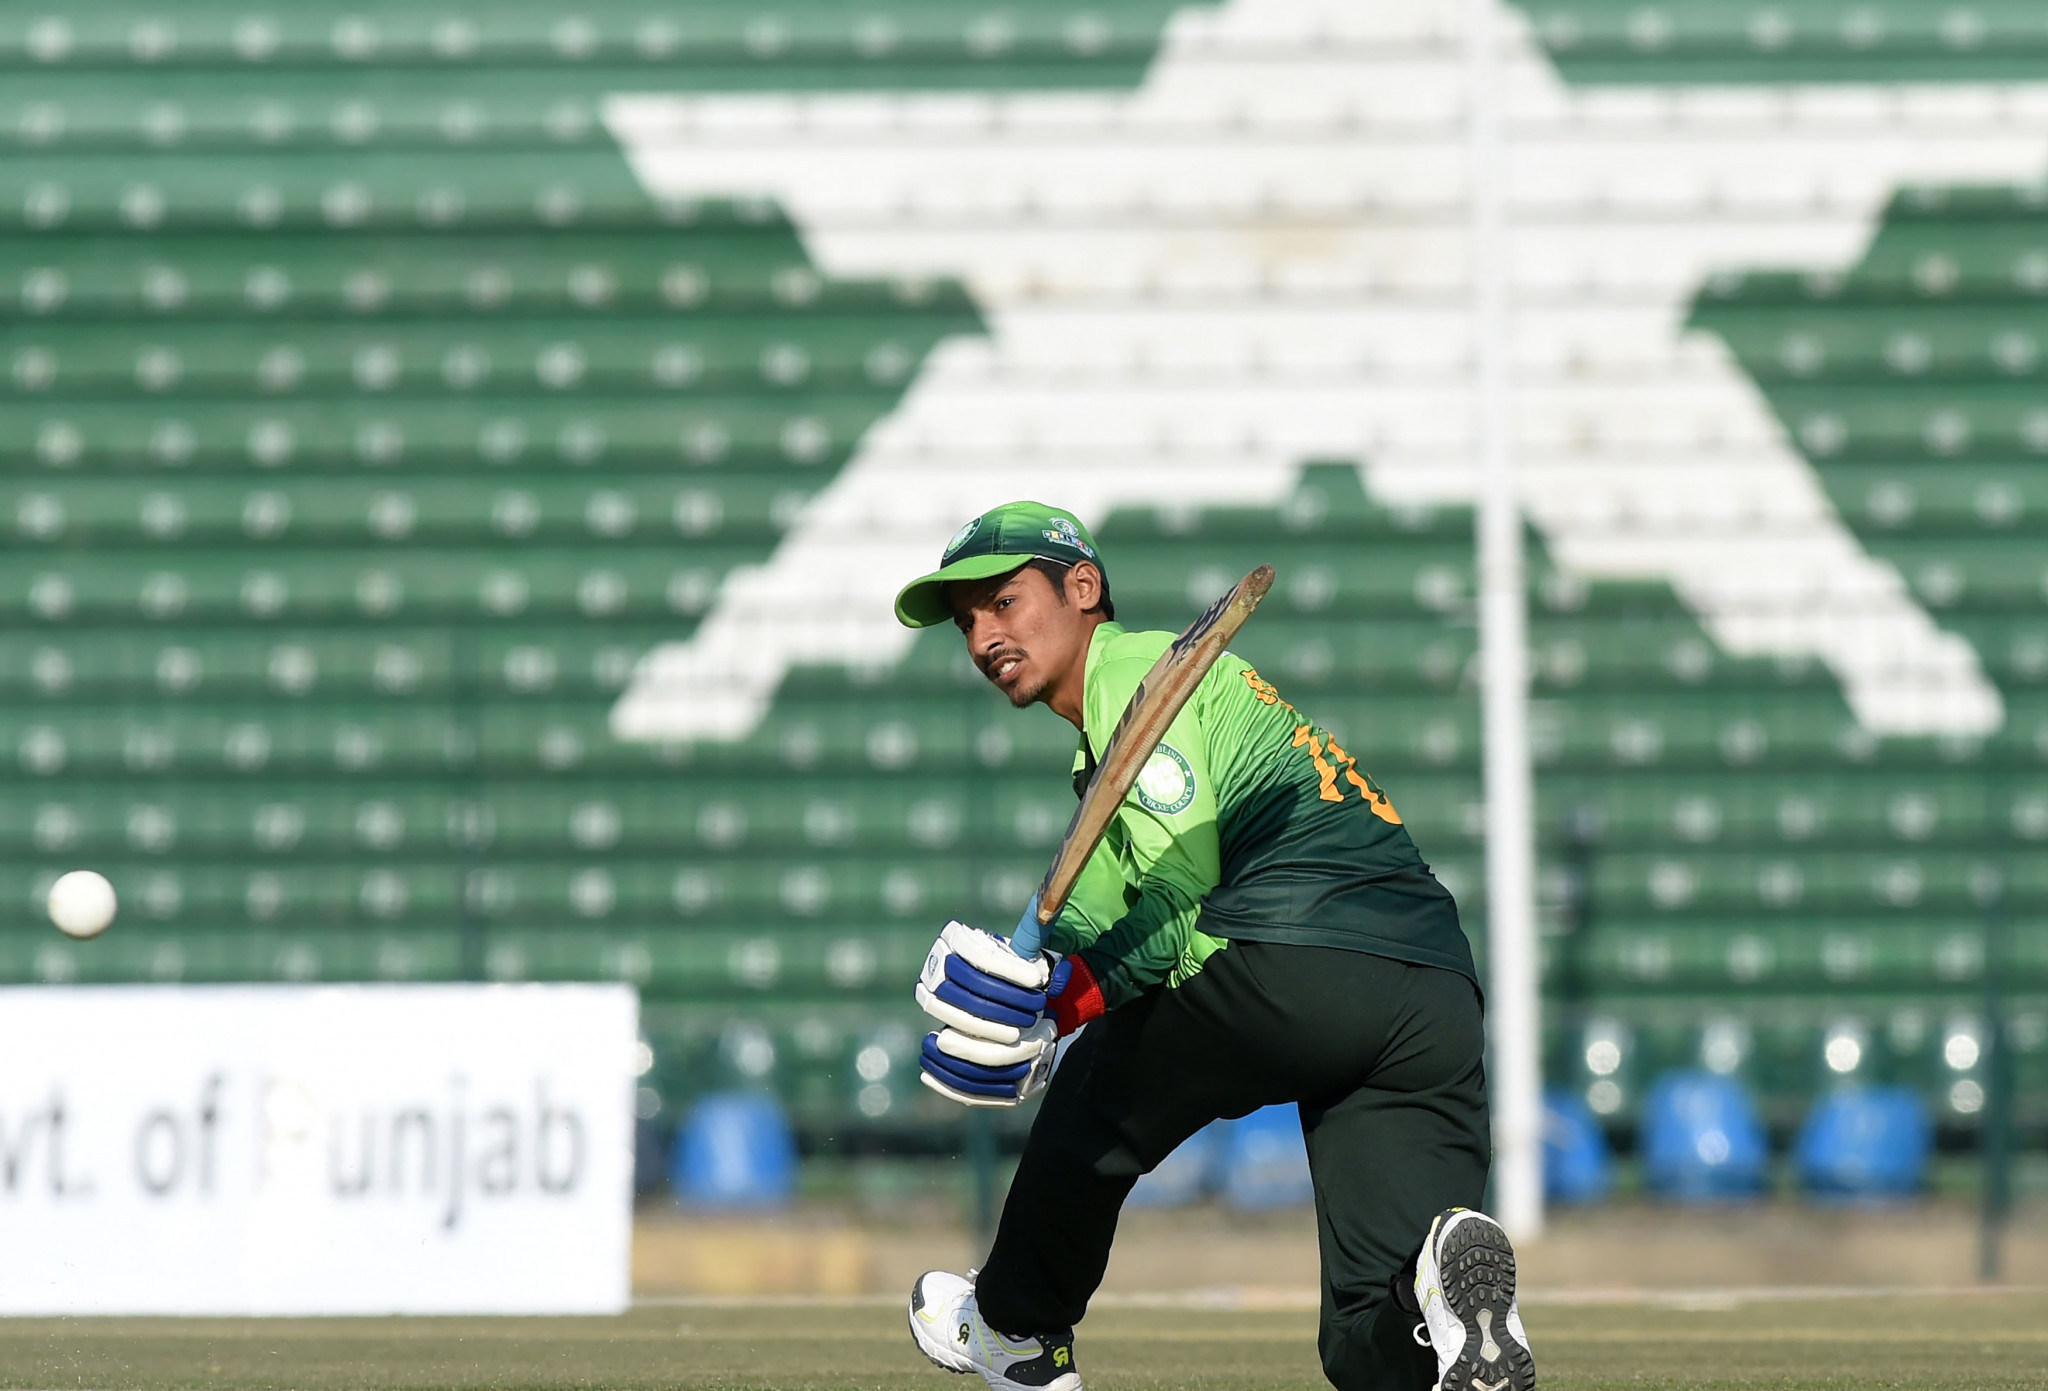 Pakistan picked up another win today at the 2018 Blind Cricket World Cup ©Getty Images